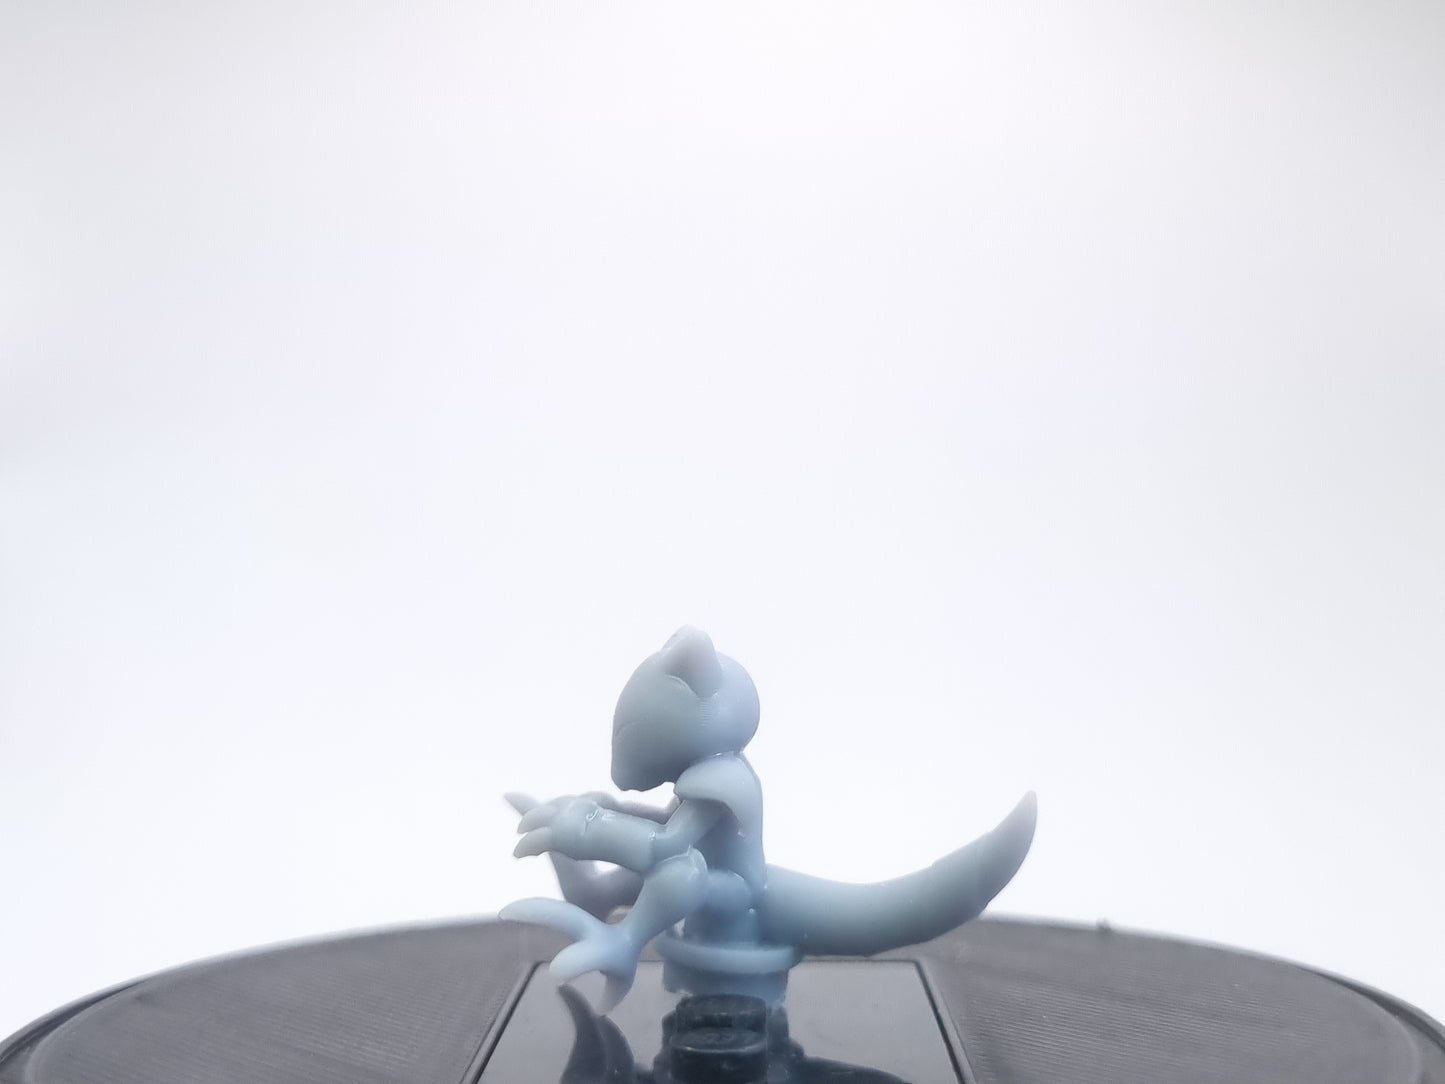 lego compatible 3D printed small magic guy!